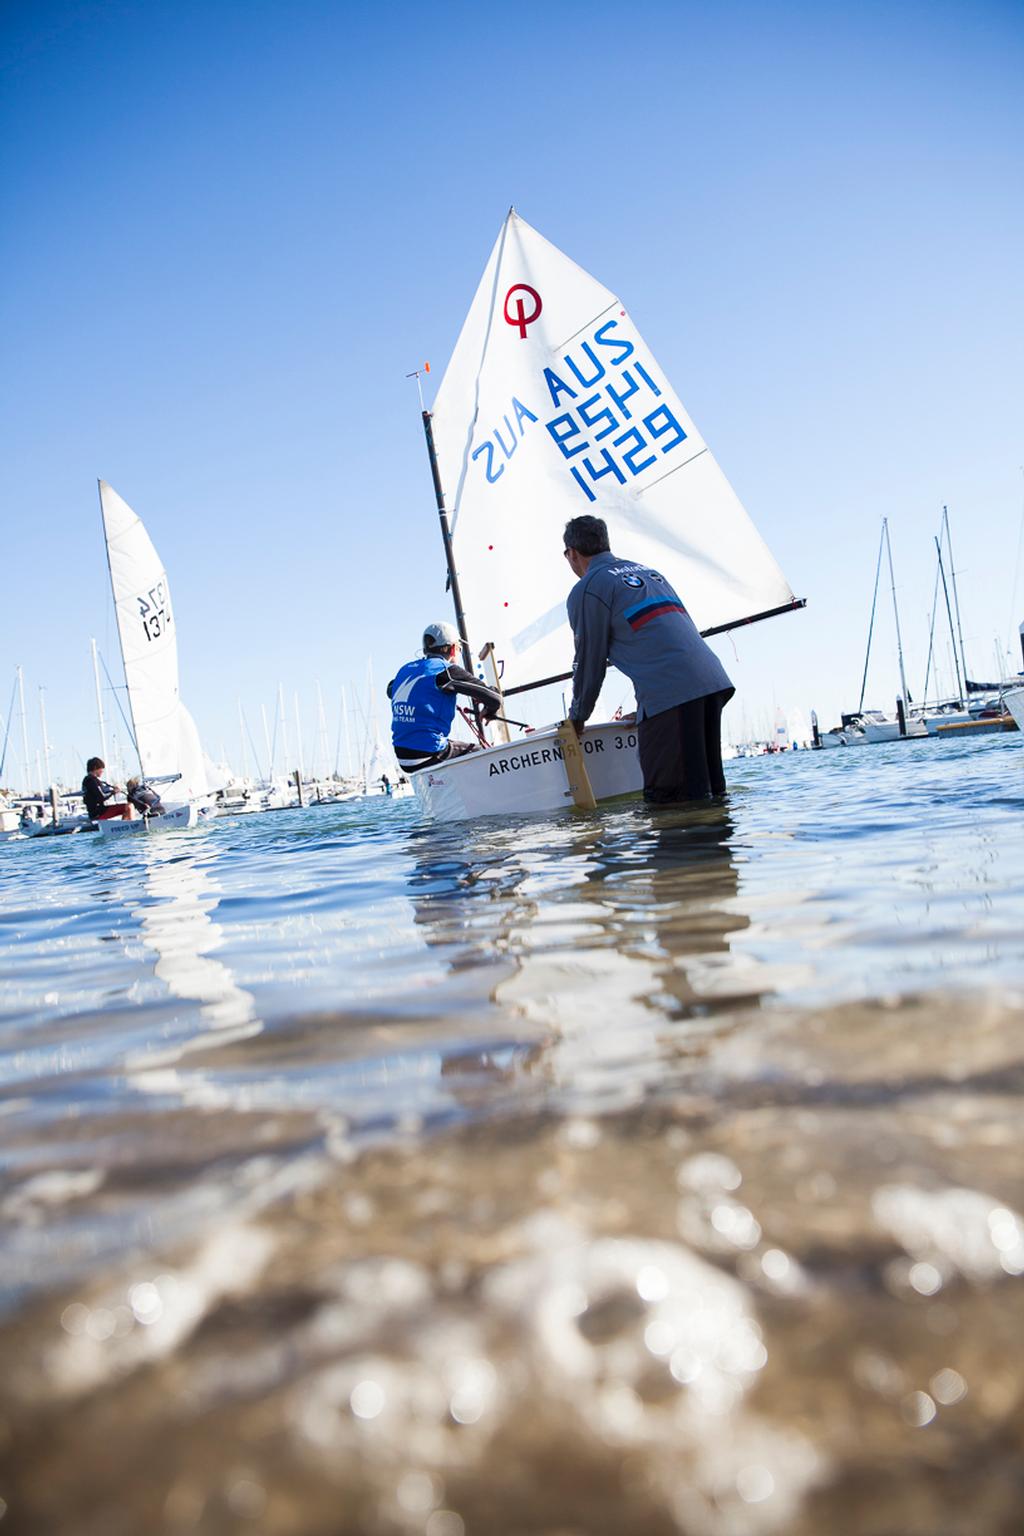 Boats launch for final days racing at the Queensland Youth Week. © Andrew Gough